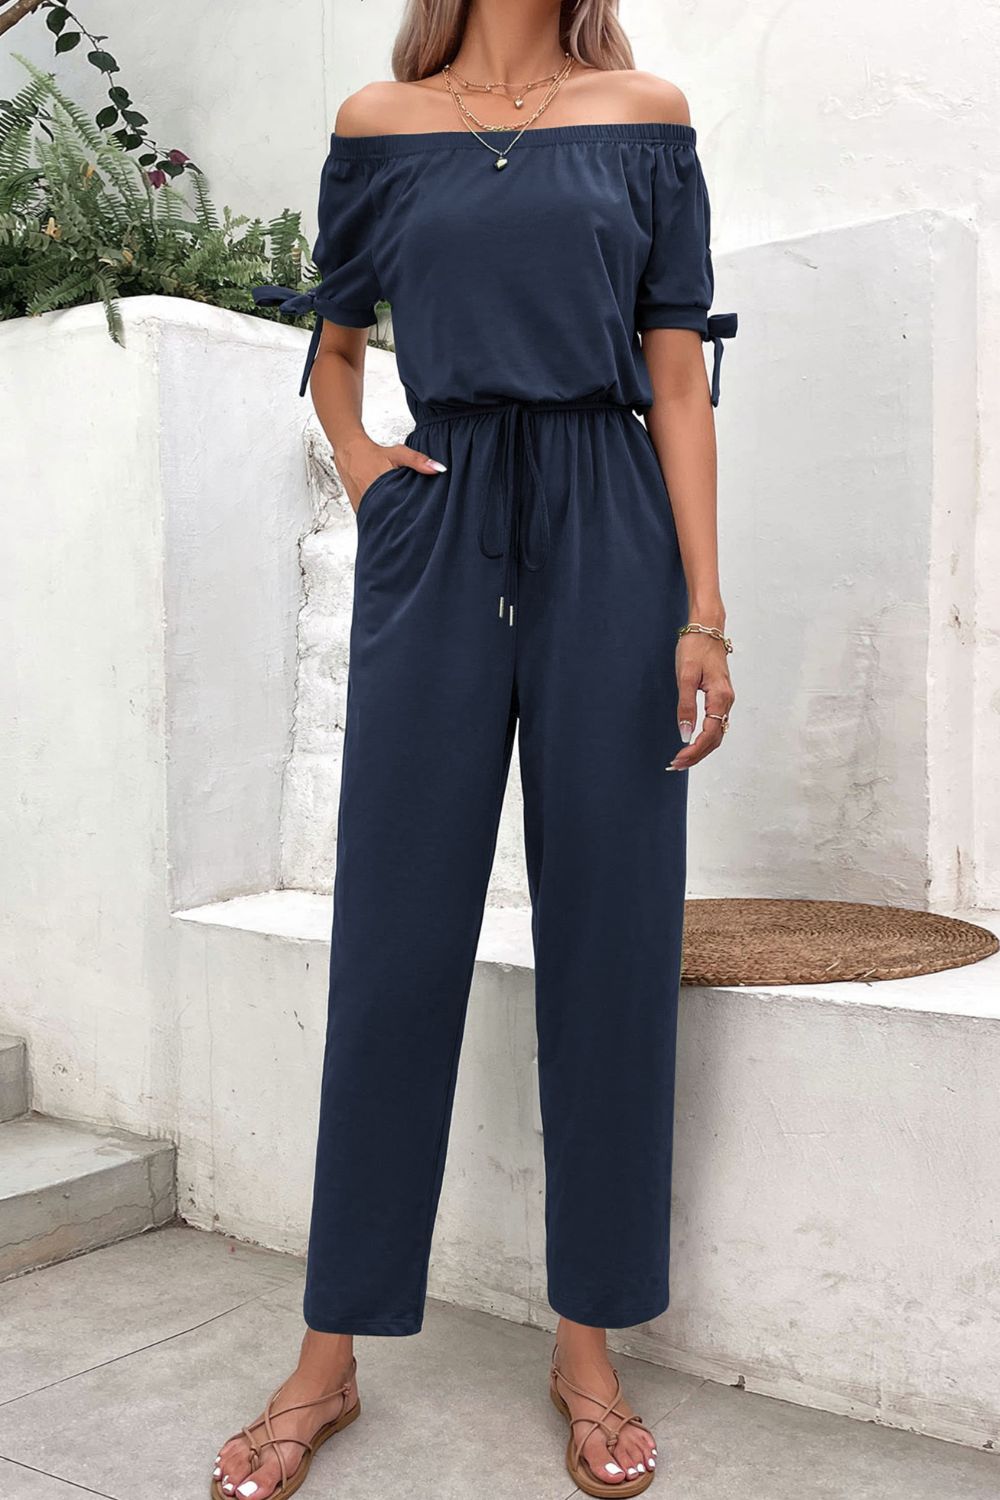 Dark Slate Gray Off-Shoulder Tie Cuff Jumpsuit with Pockets Clothing